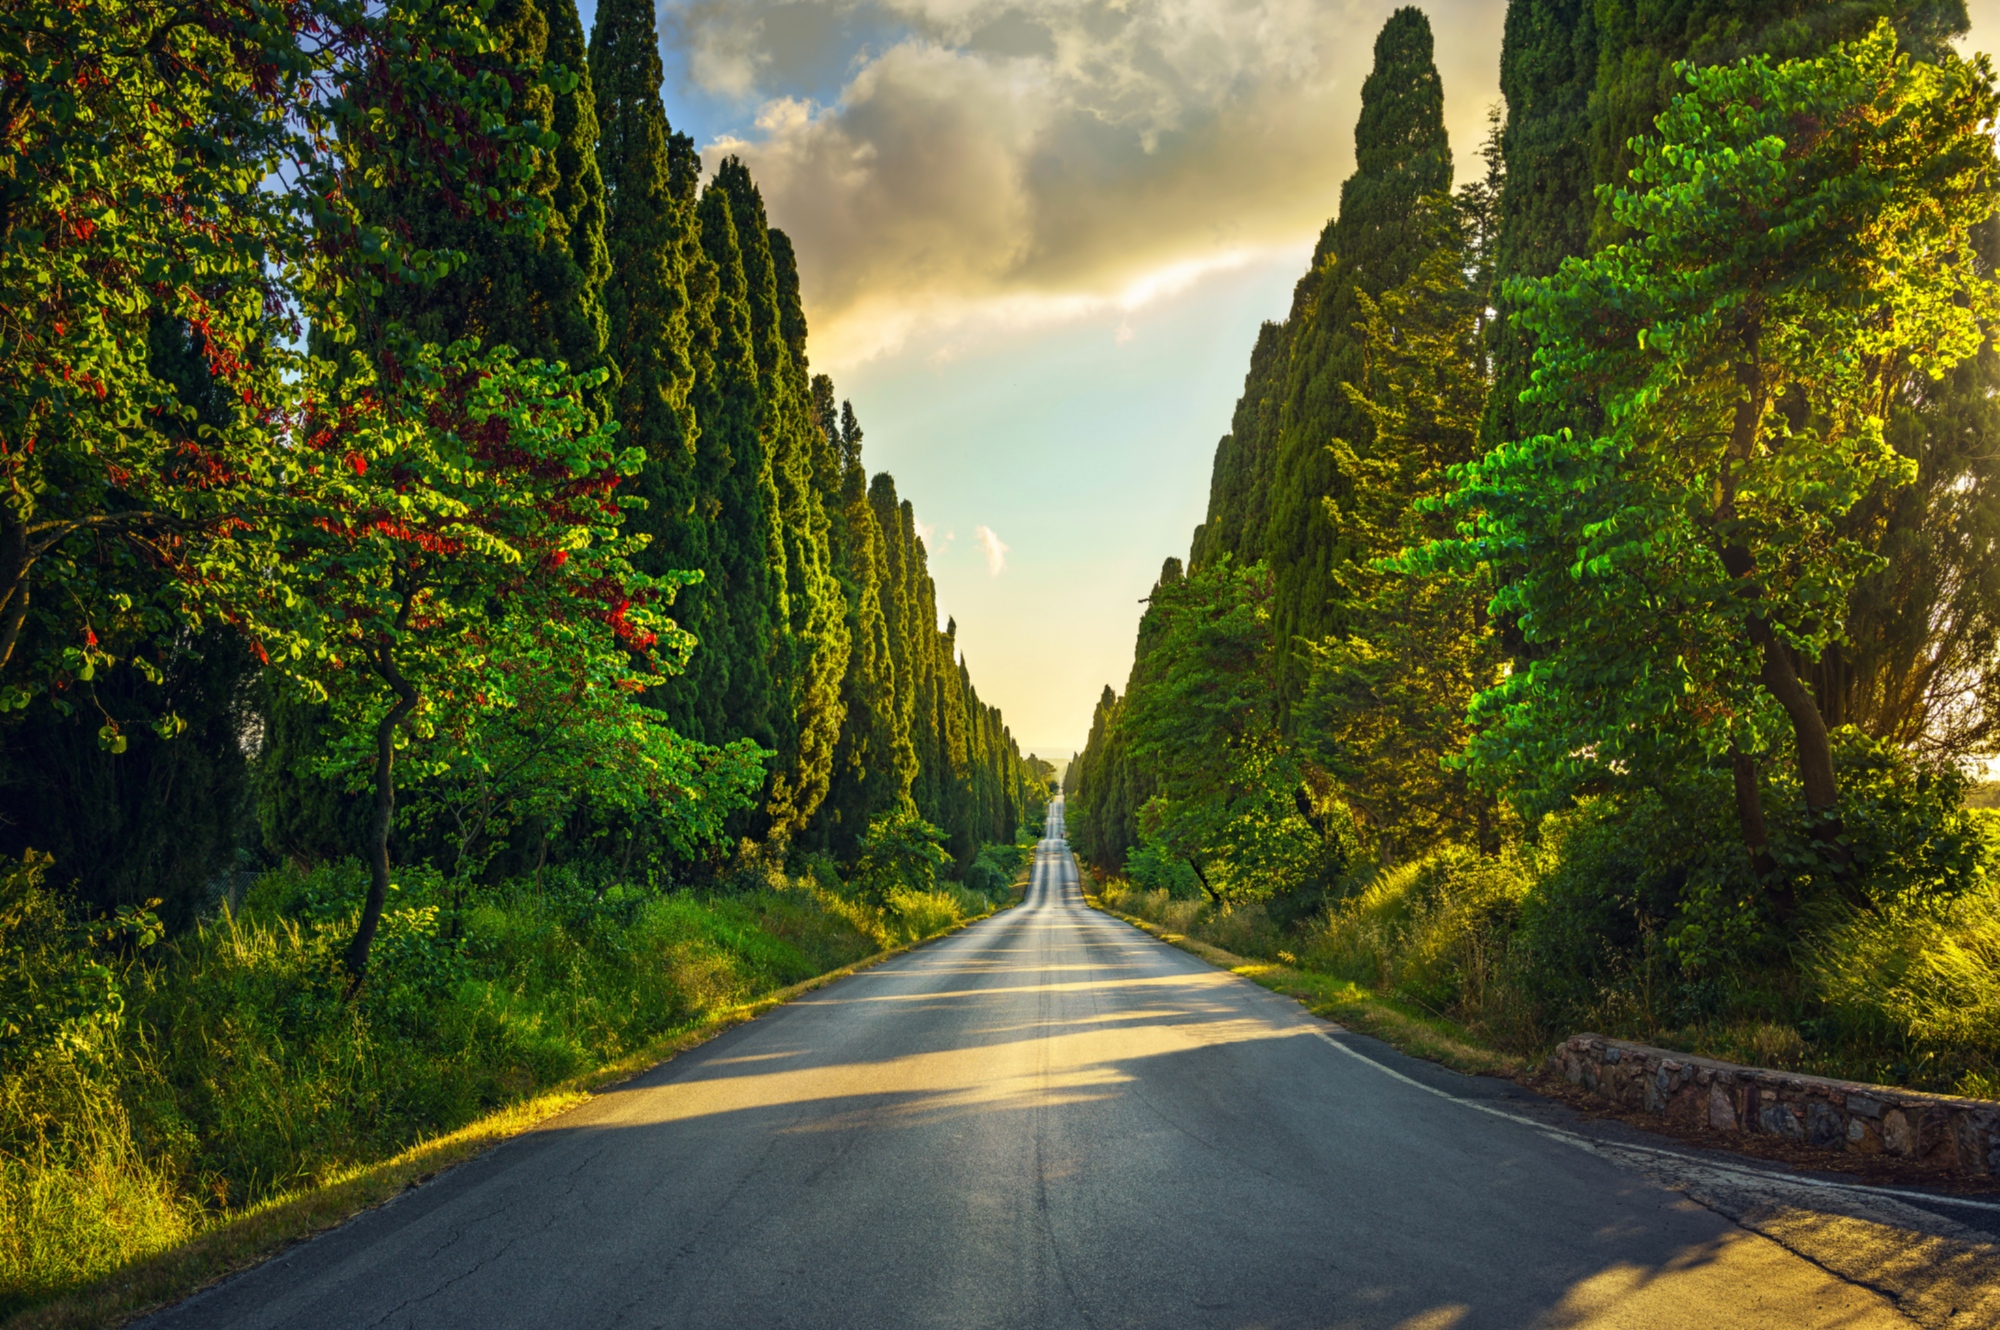 The cypress tree-lined road at Bolgheri